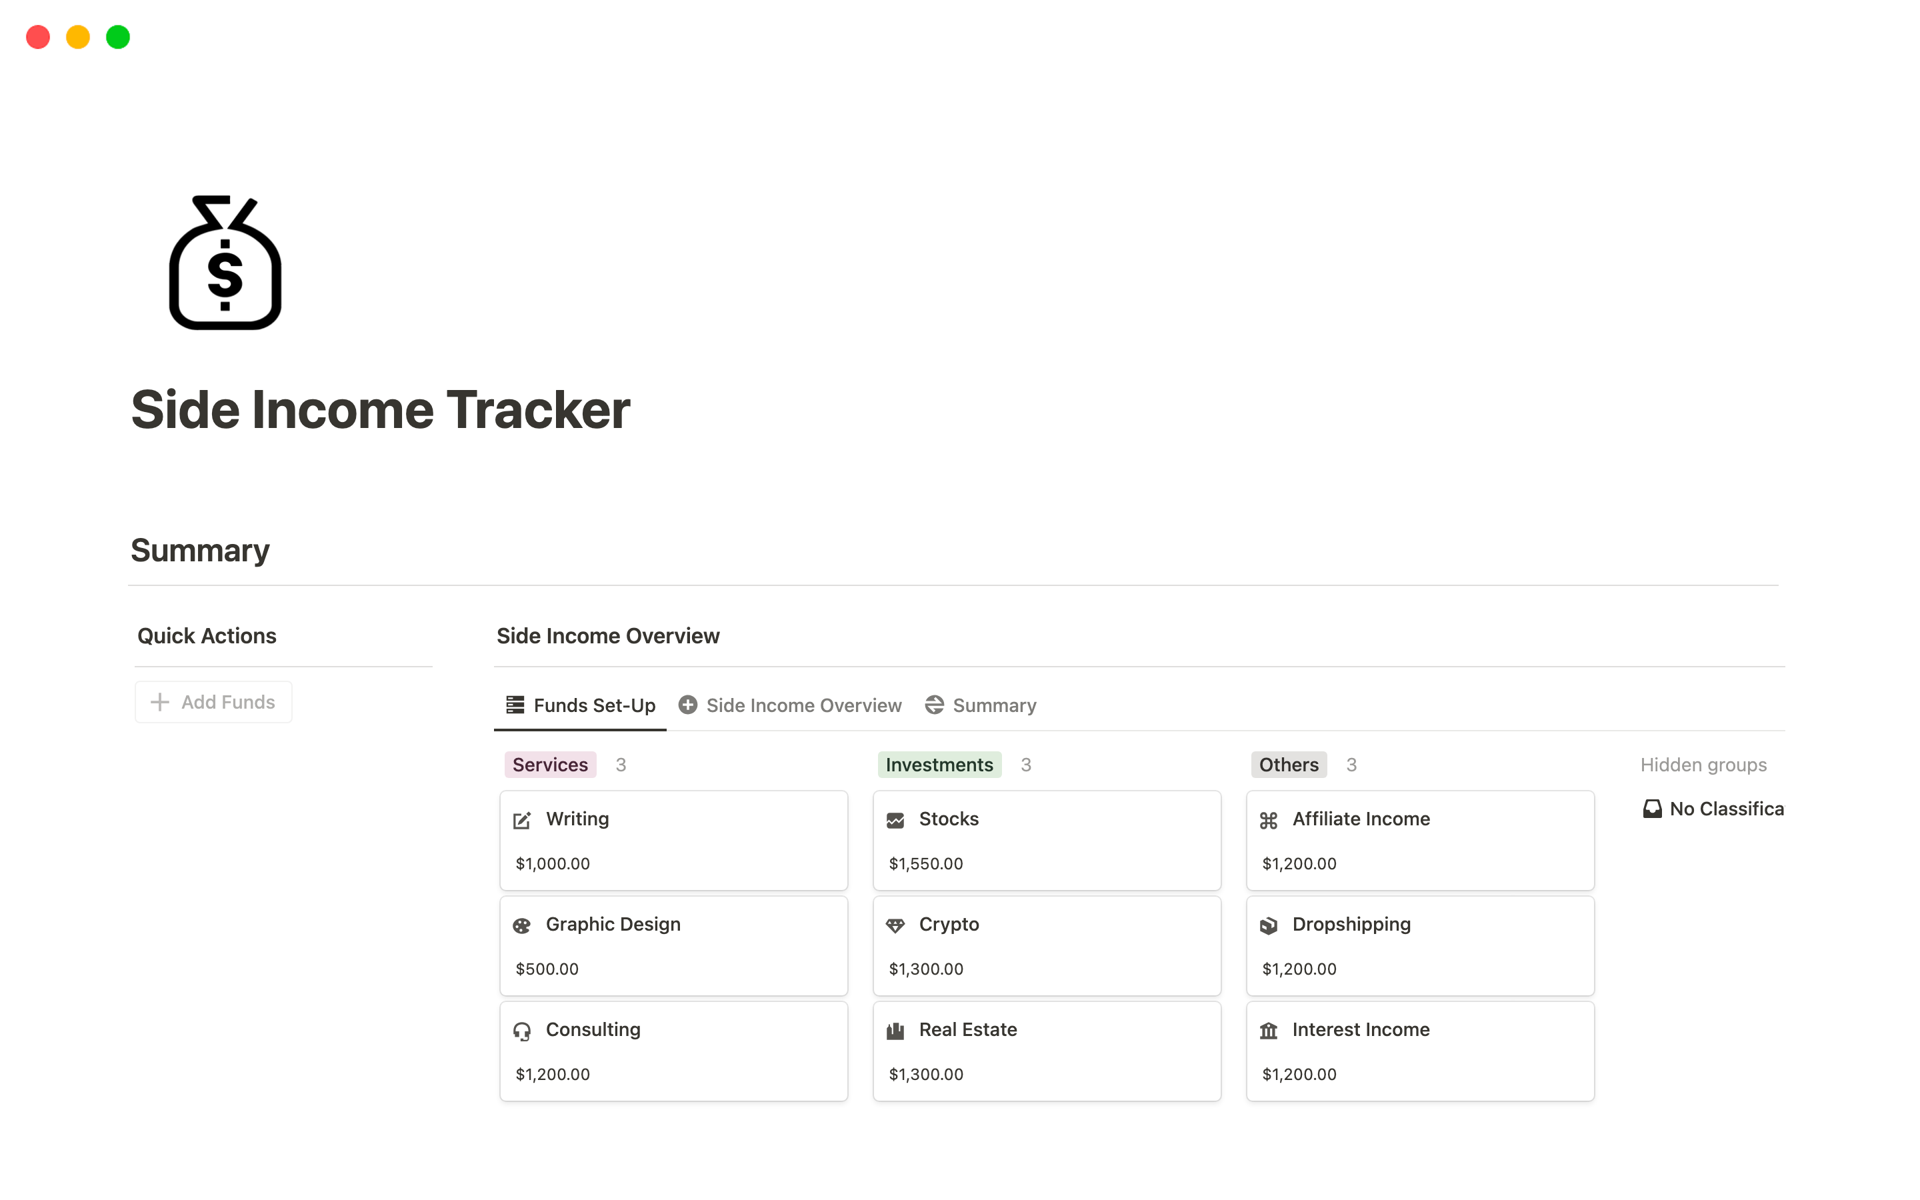 If you have multiple sources of side income or gig work, this tracker helps you monitor your earnings from various sources, ensuring you're maximizing your potential income.